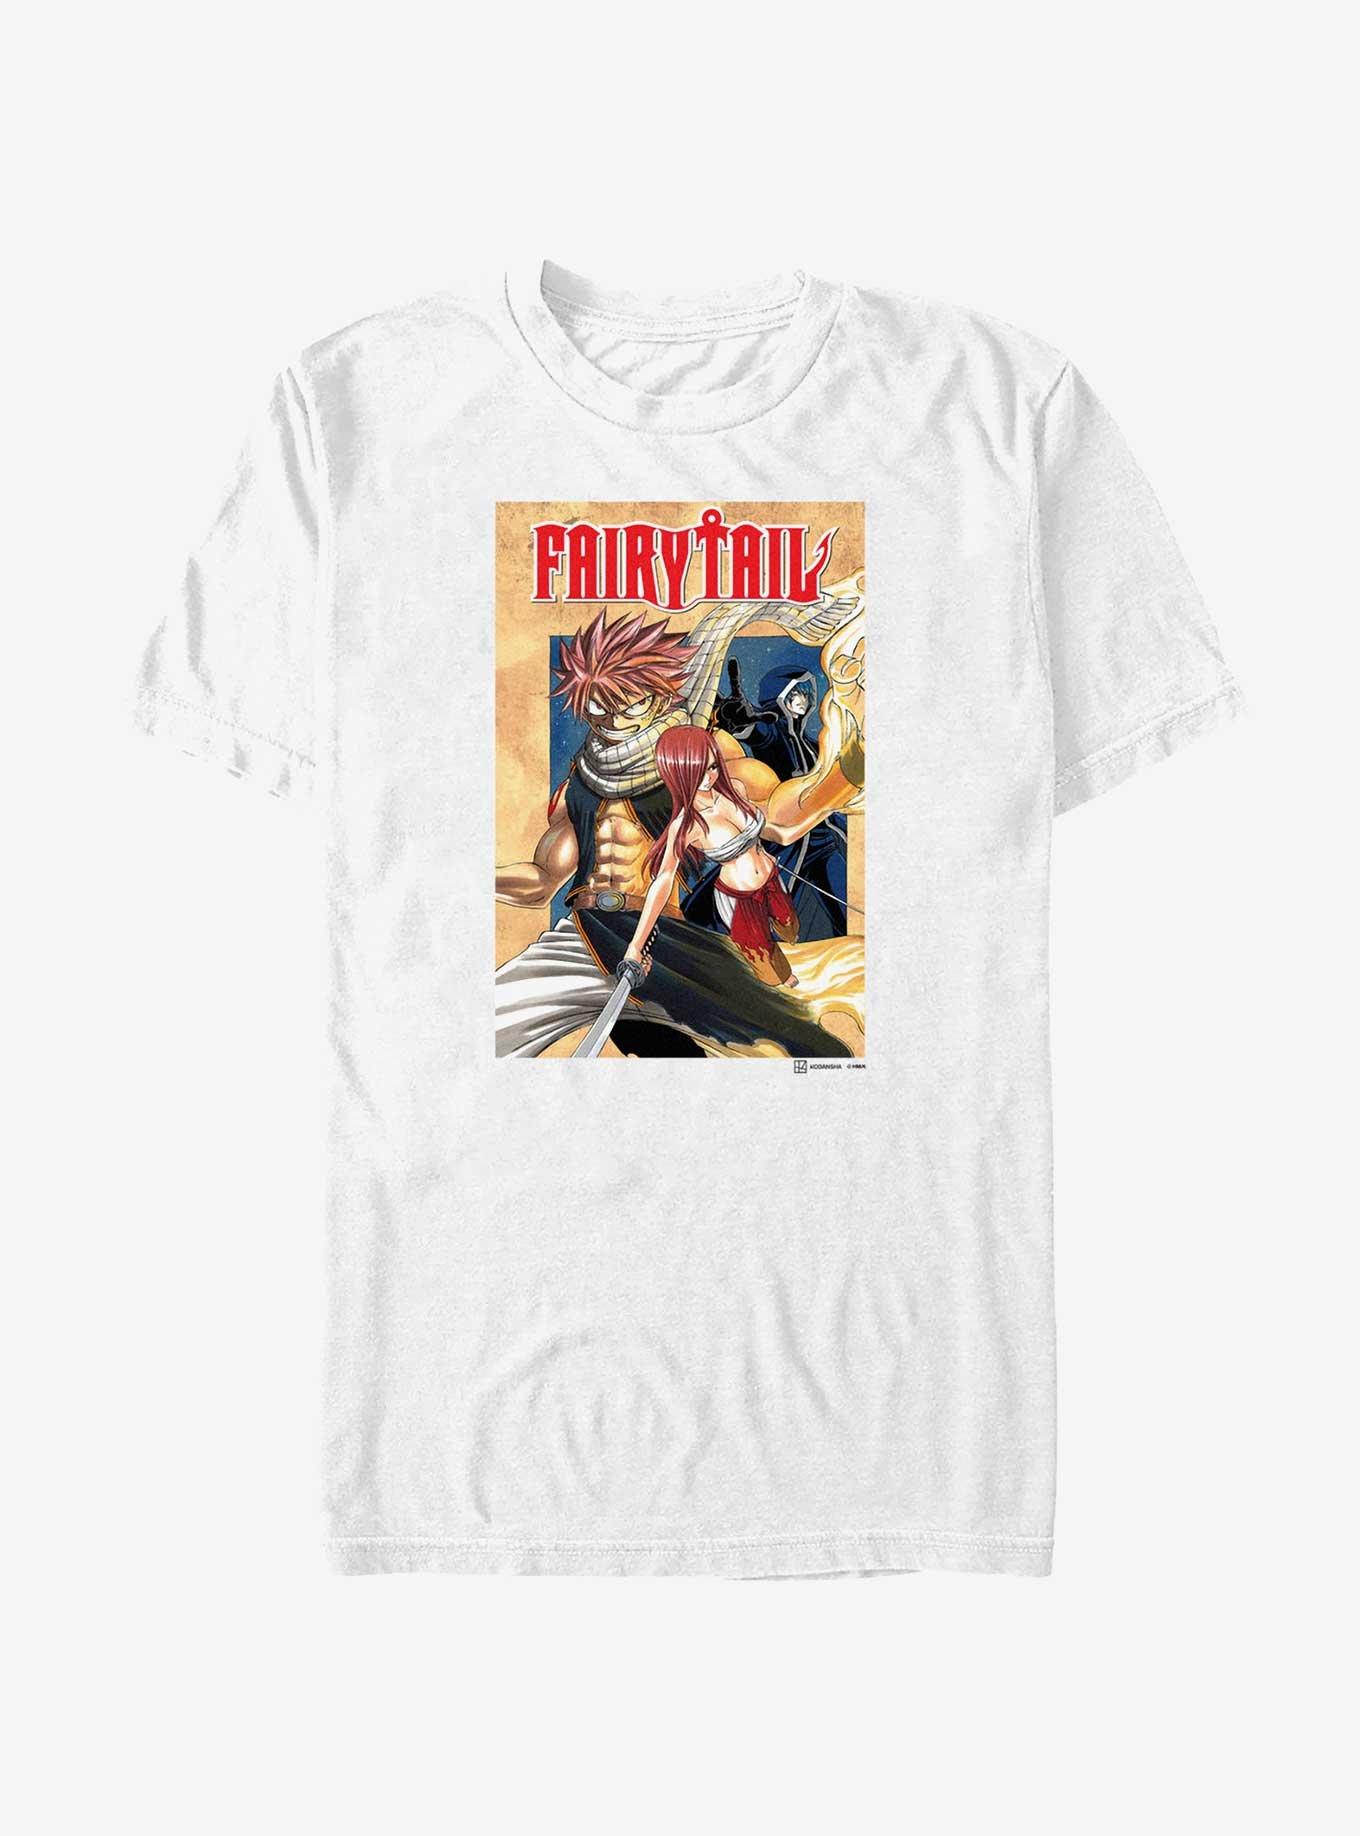 Fairy Tail Cover T-Shirt, WHITE, hi-res